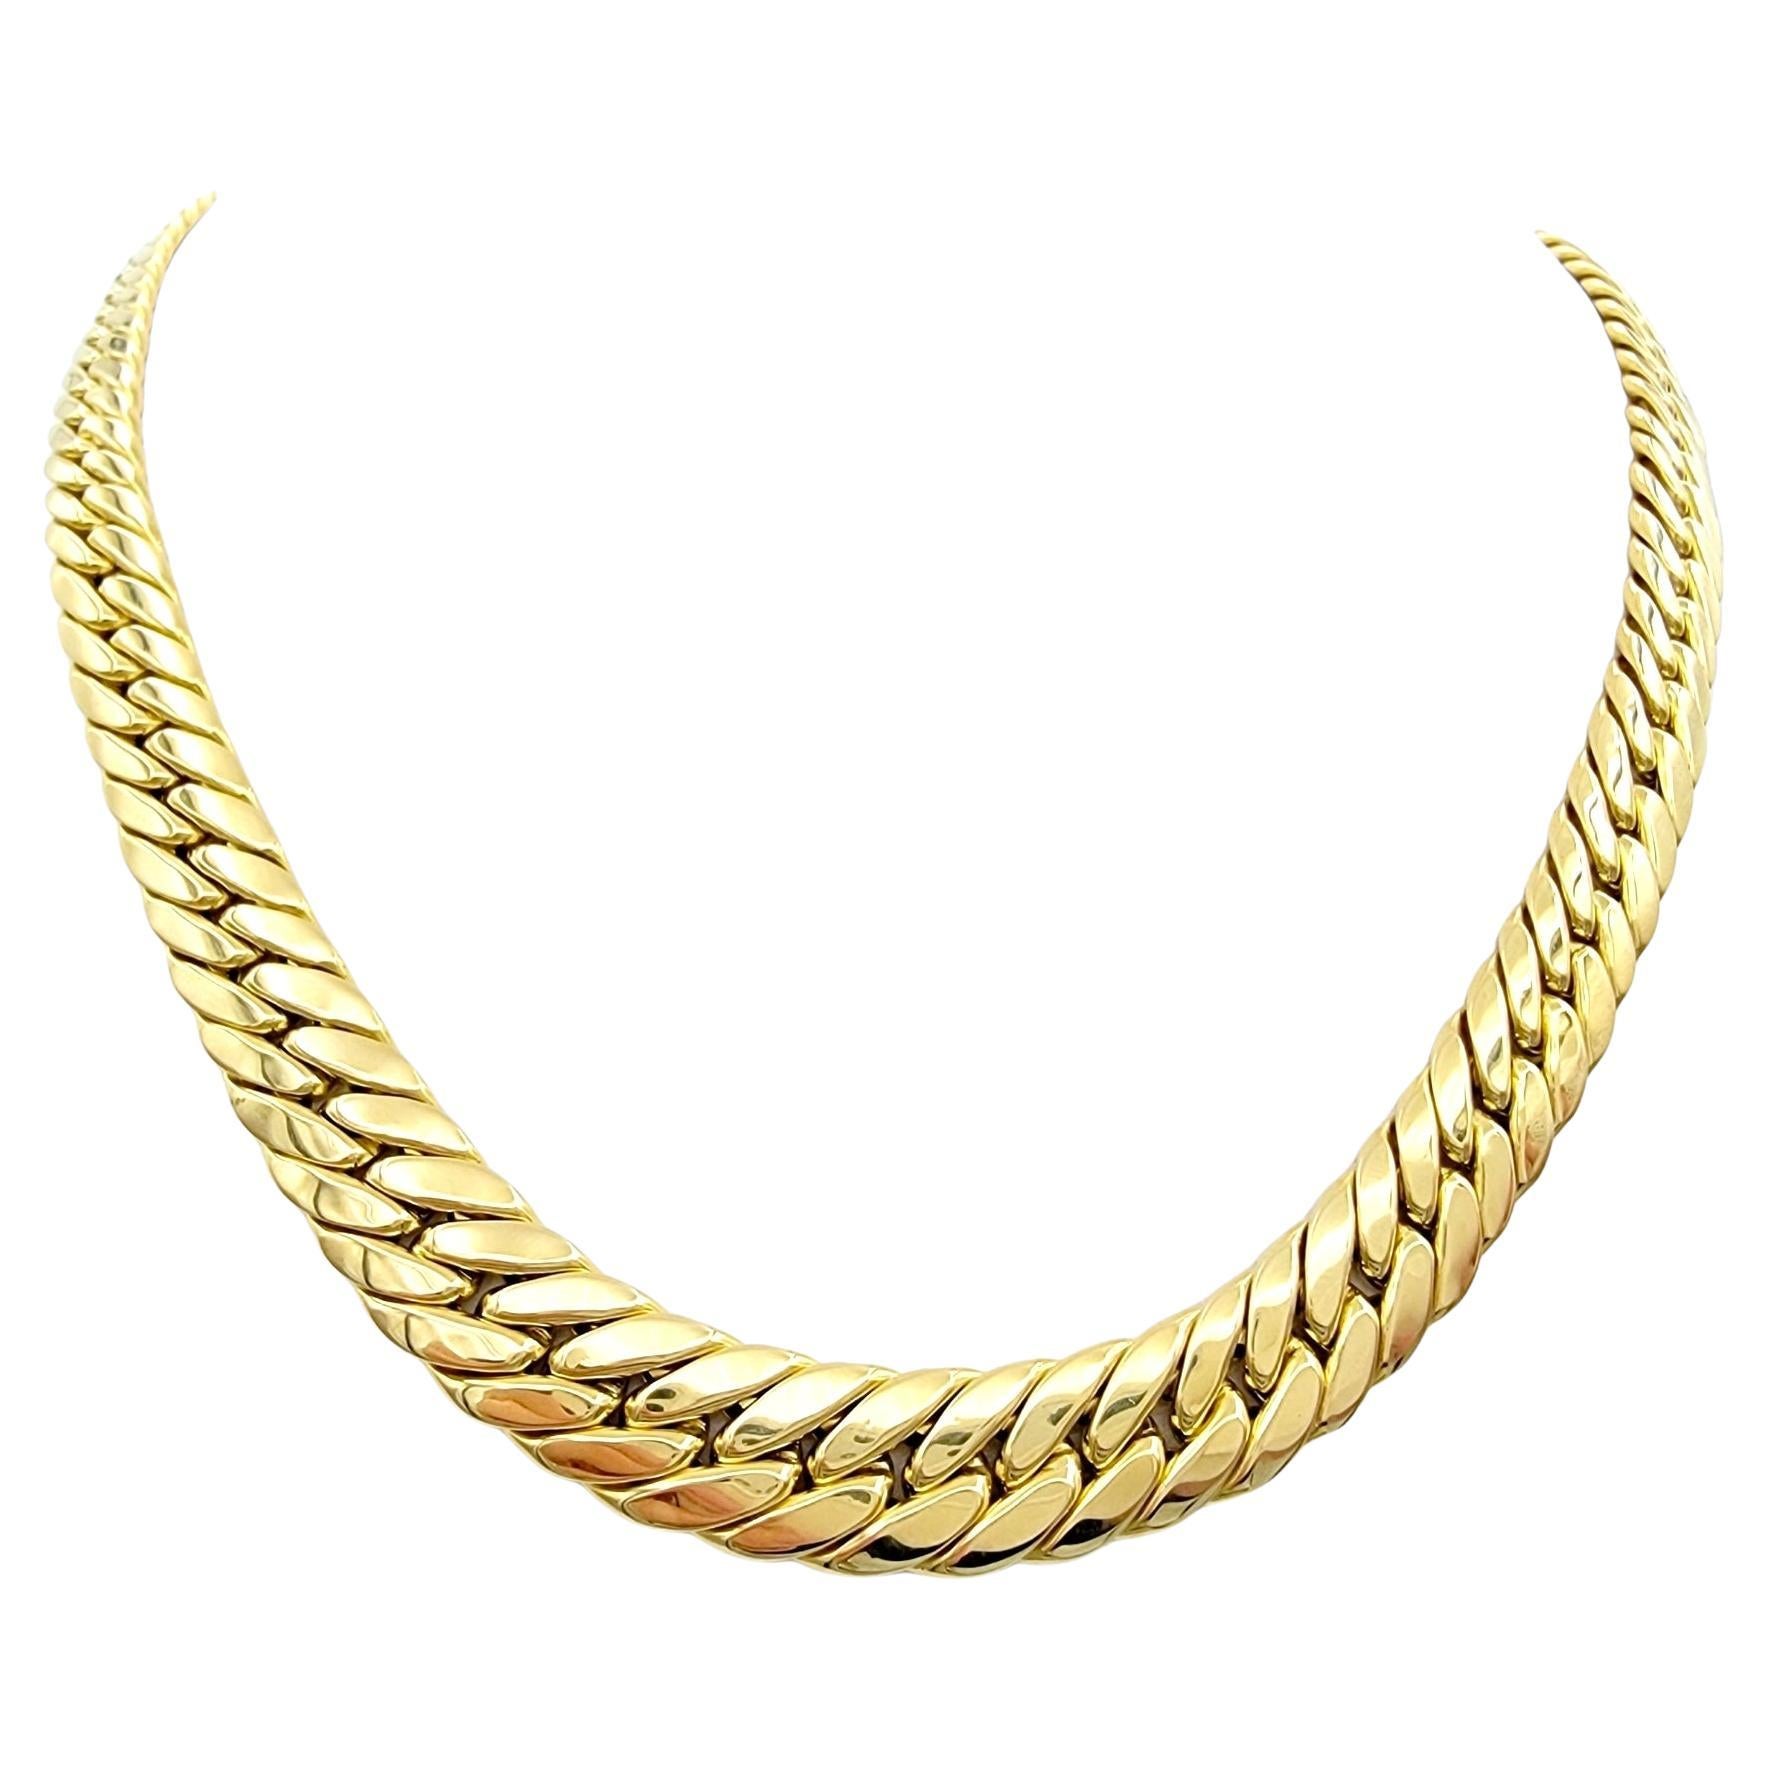 What does a gold chain symbolize?